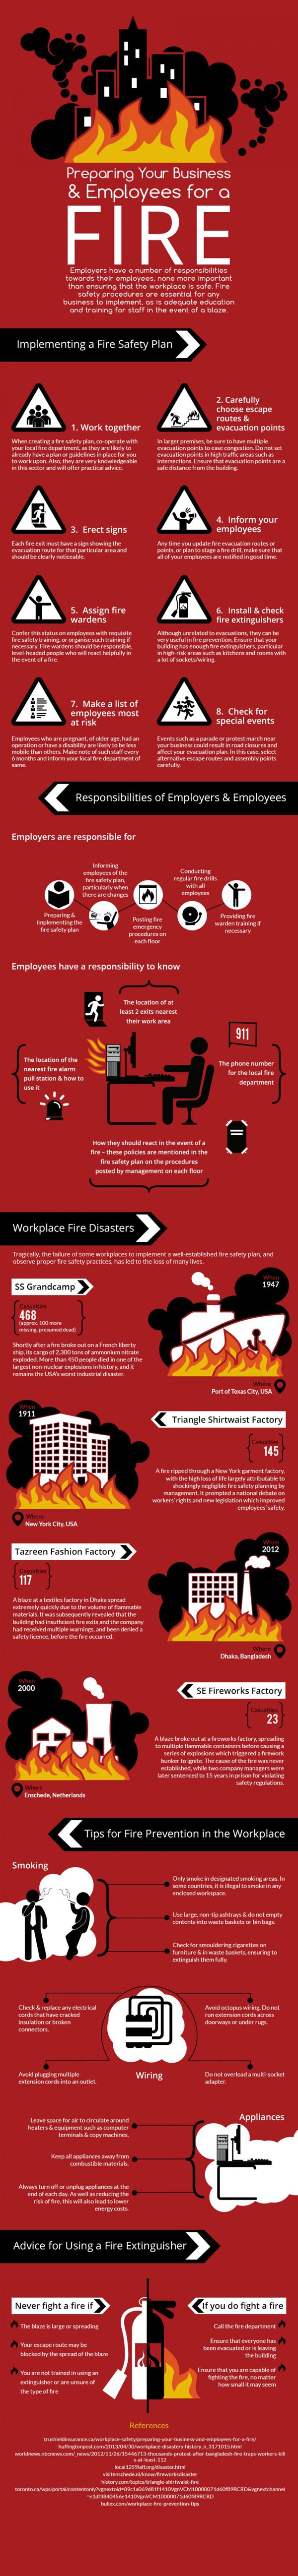 Fire Protection Tips for Business and Employees 1